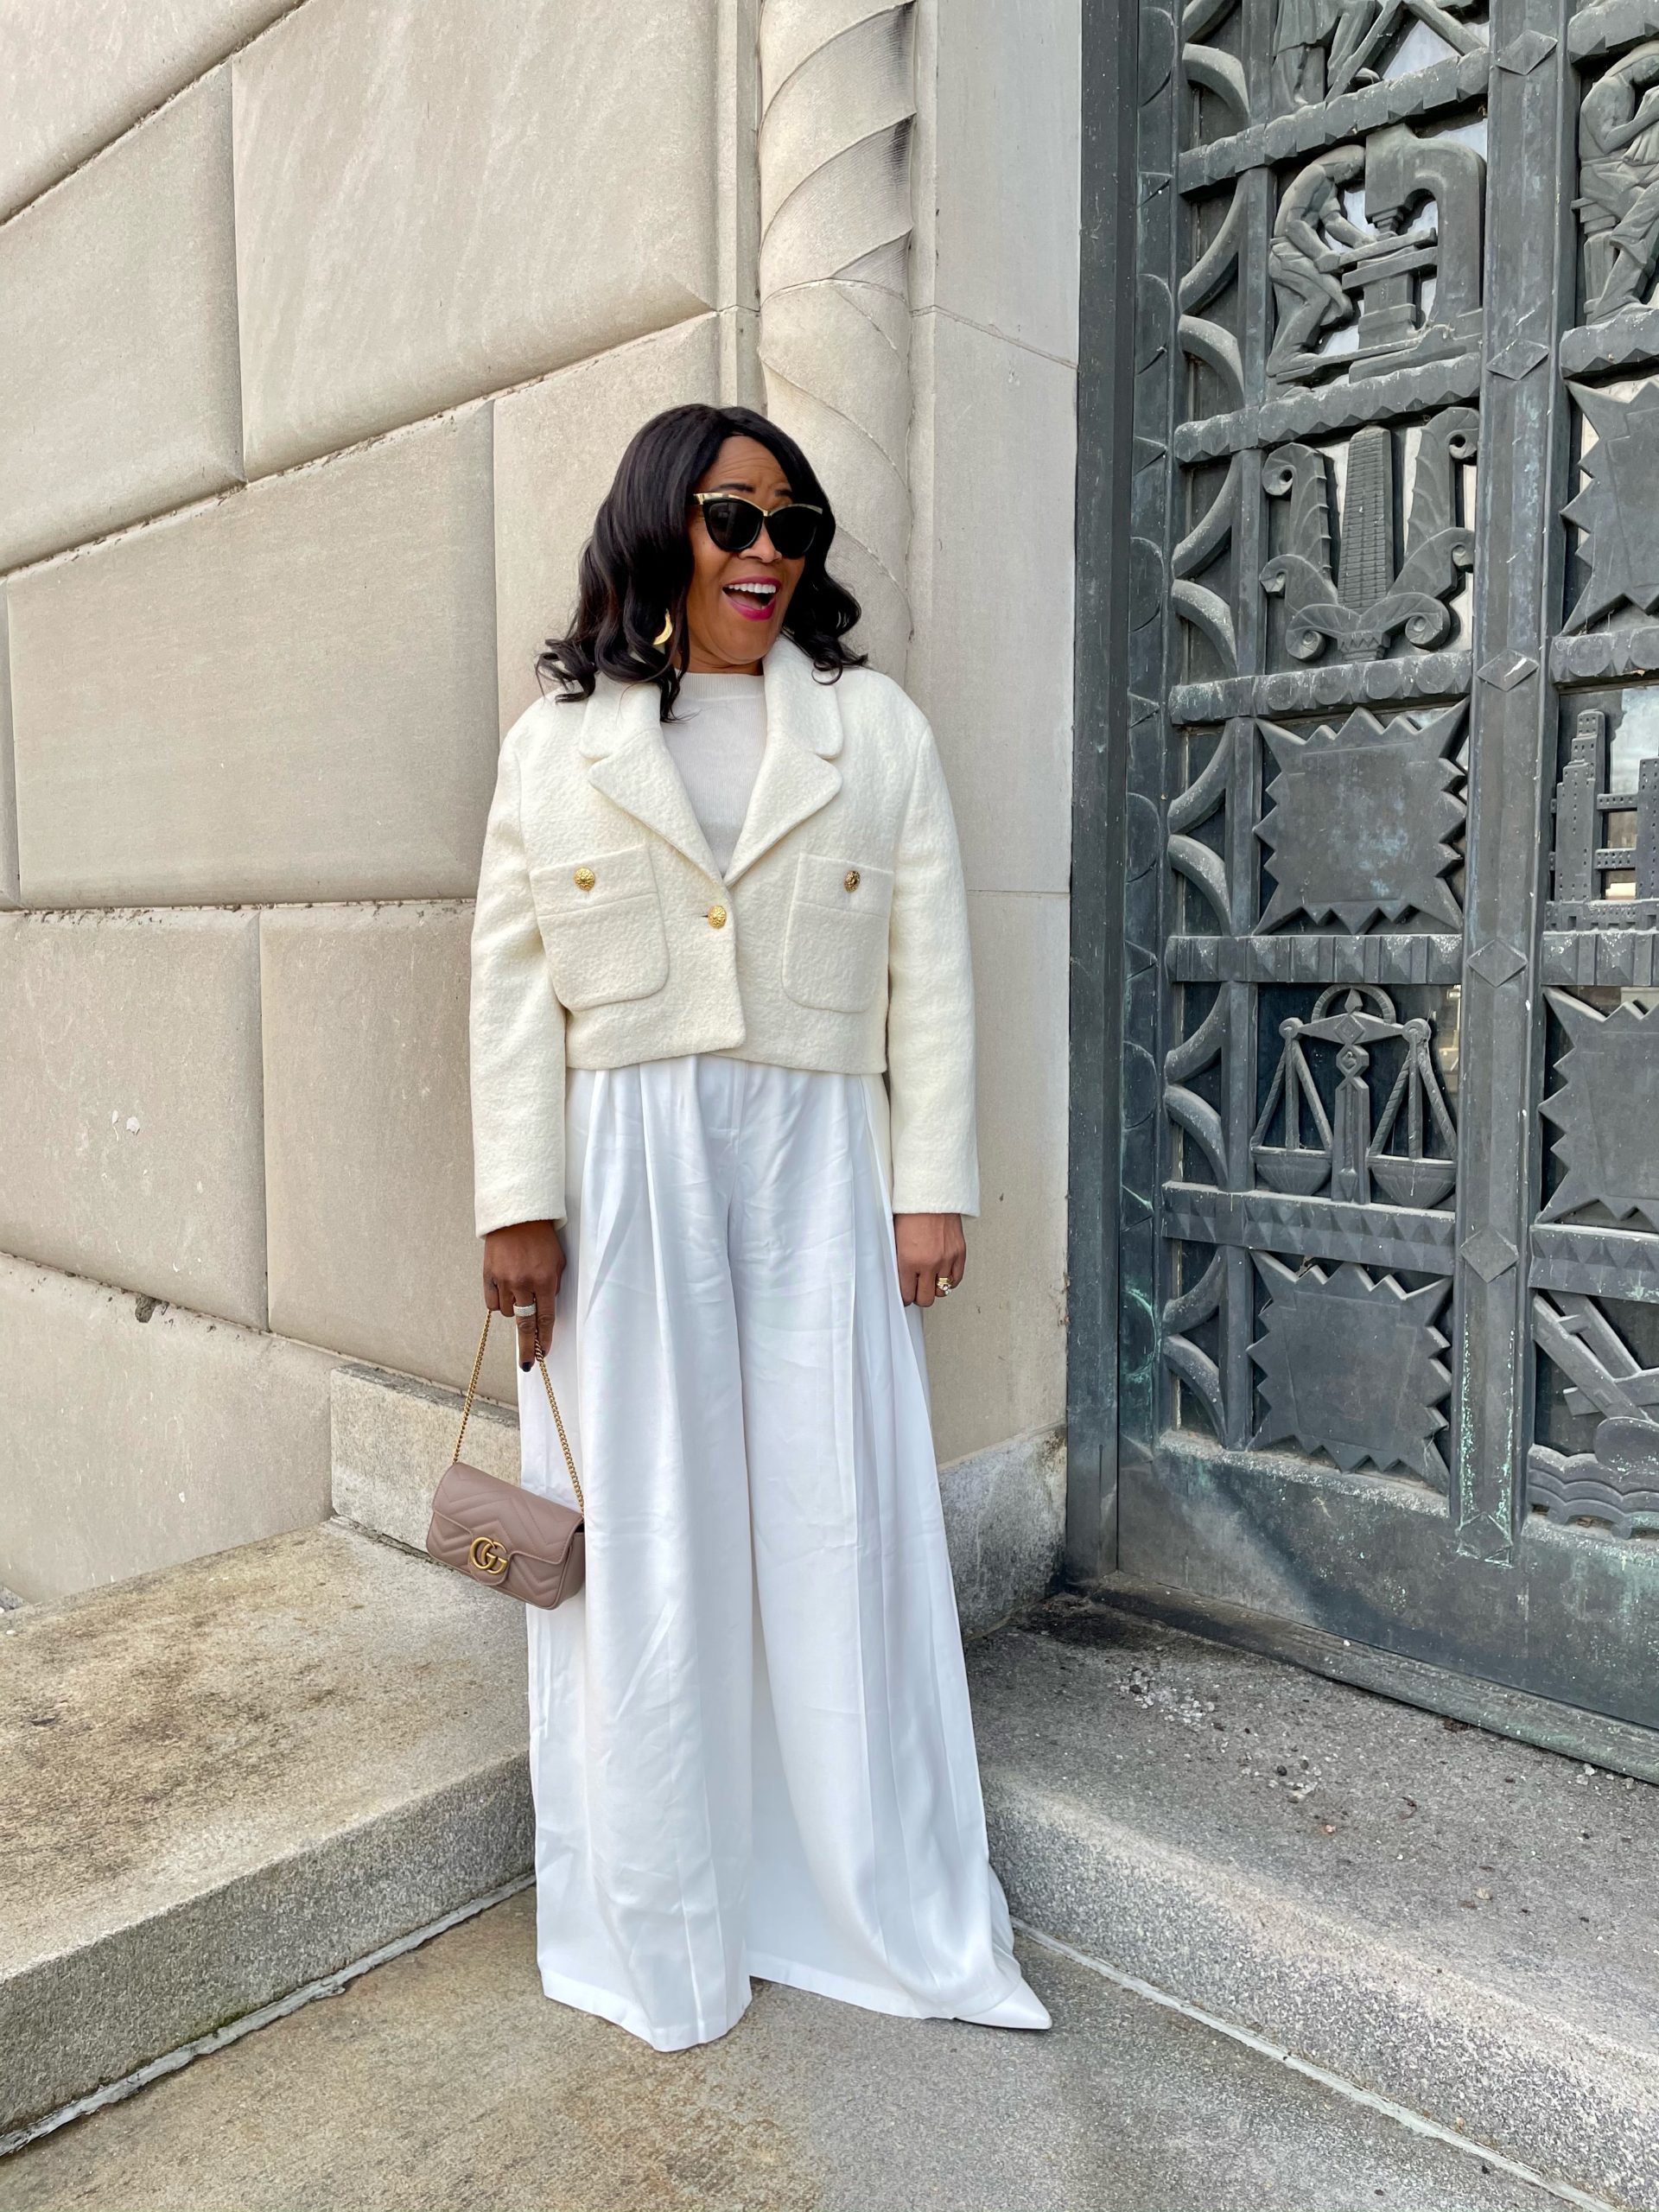 Zara Cropped Blazer in White with On and Off the Runway High-waisted Wide Leg White Pants